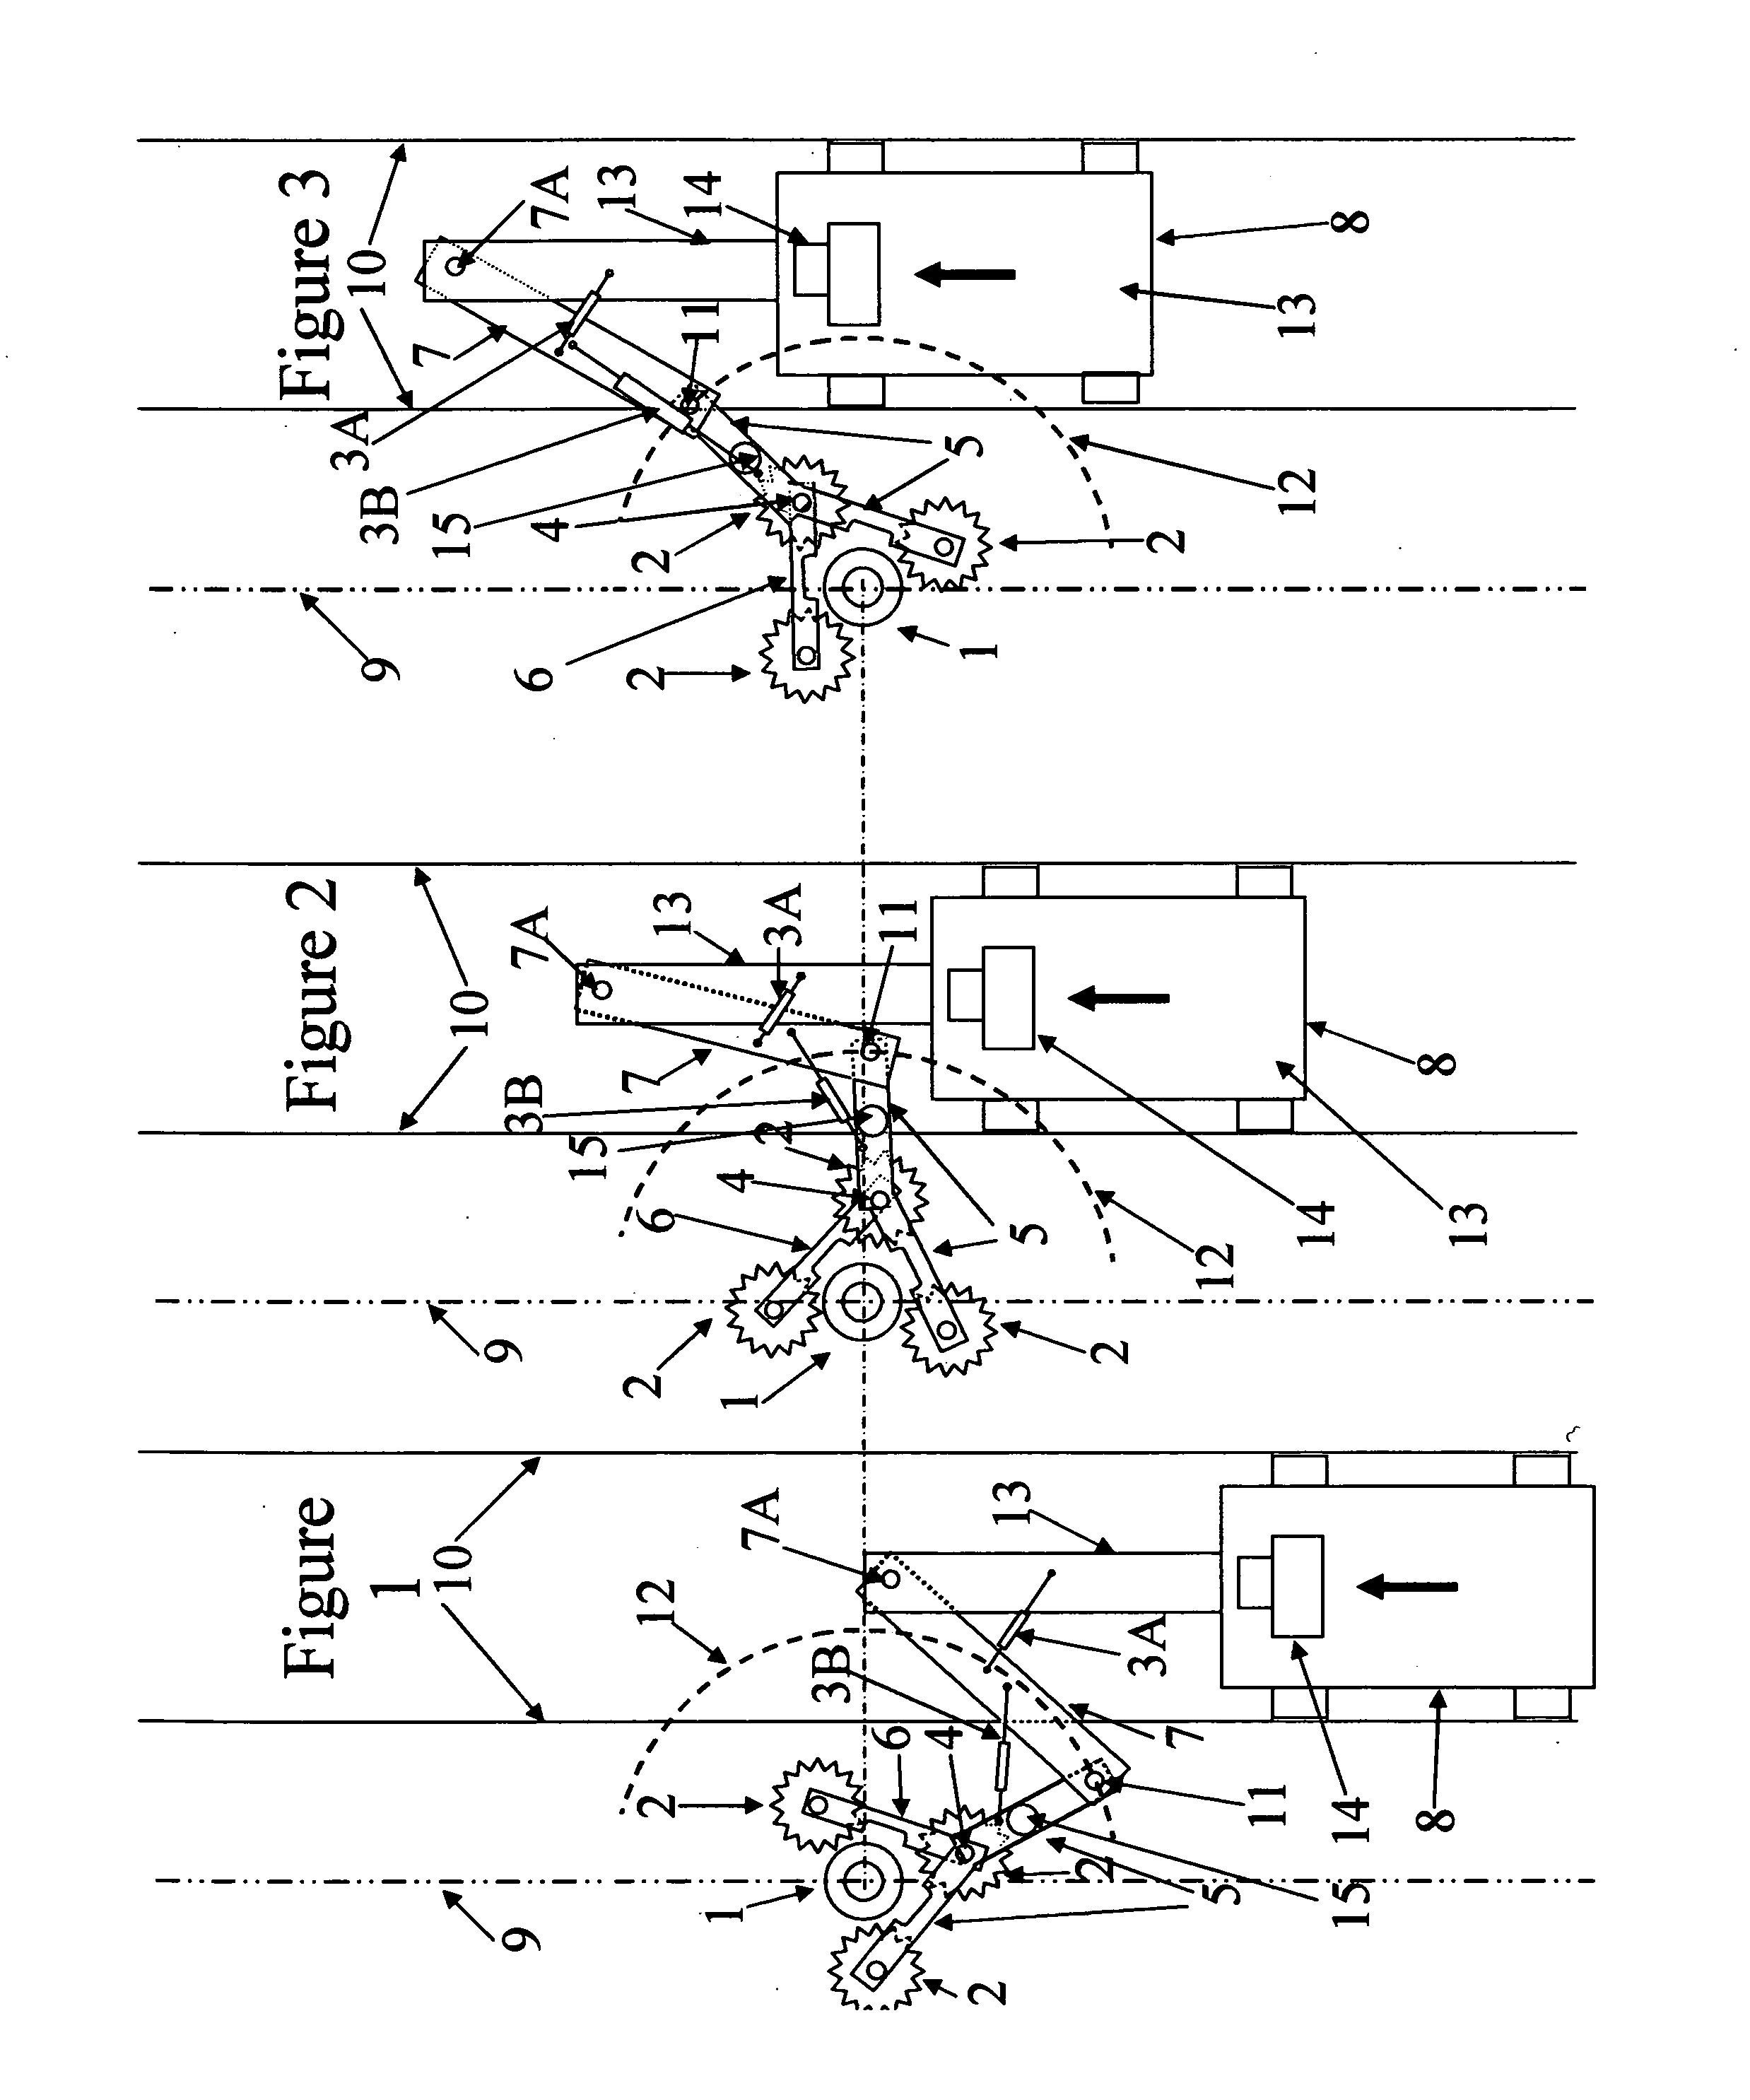 Device and process for cleaning electrified contact rail insulators for rail rapid transit systems